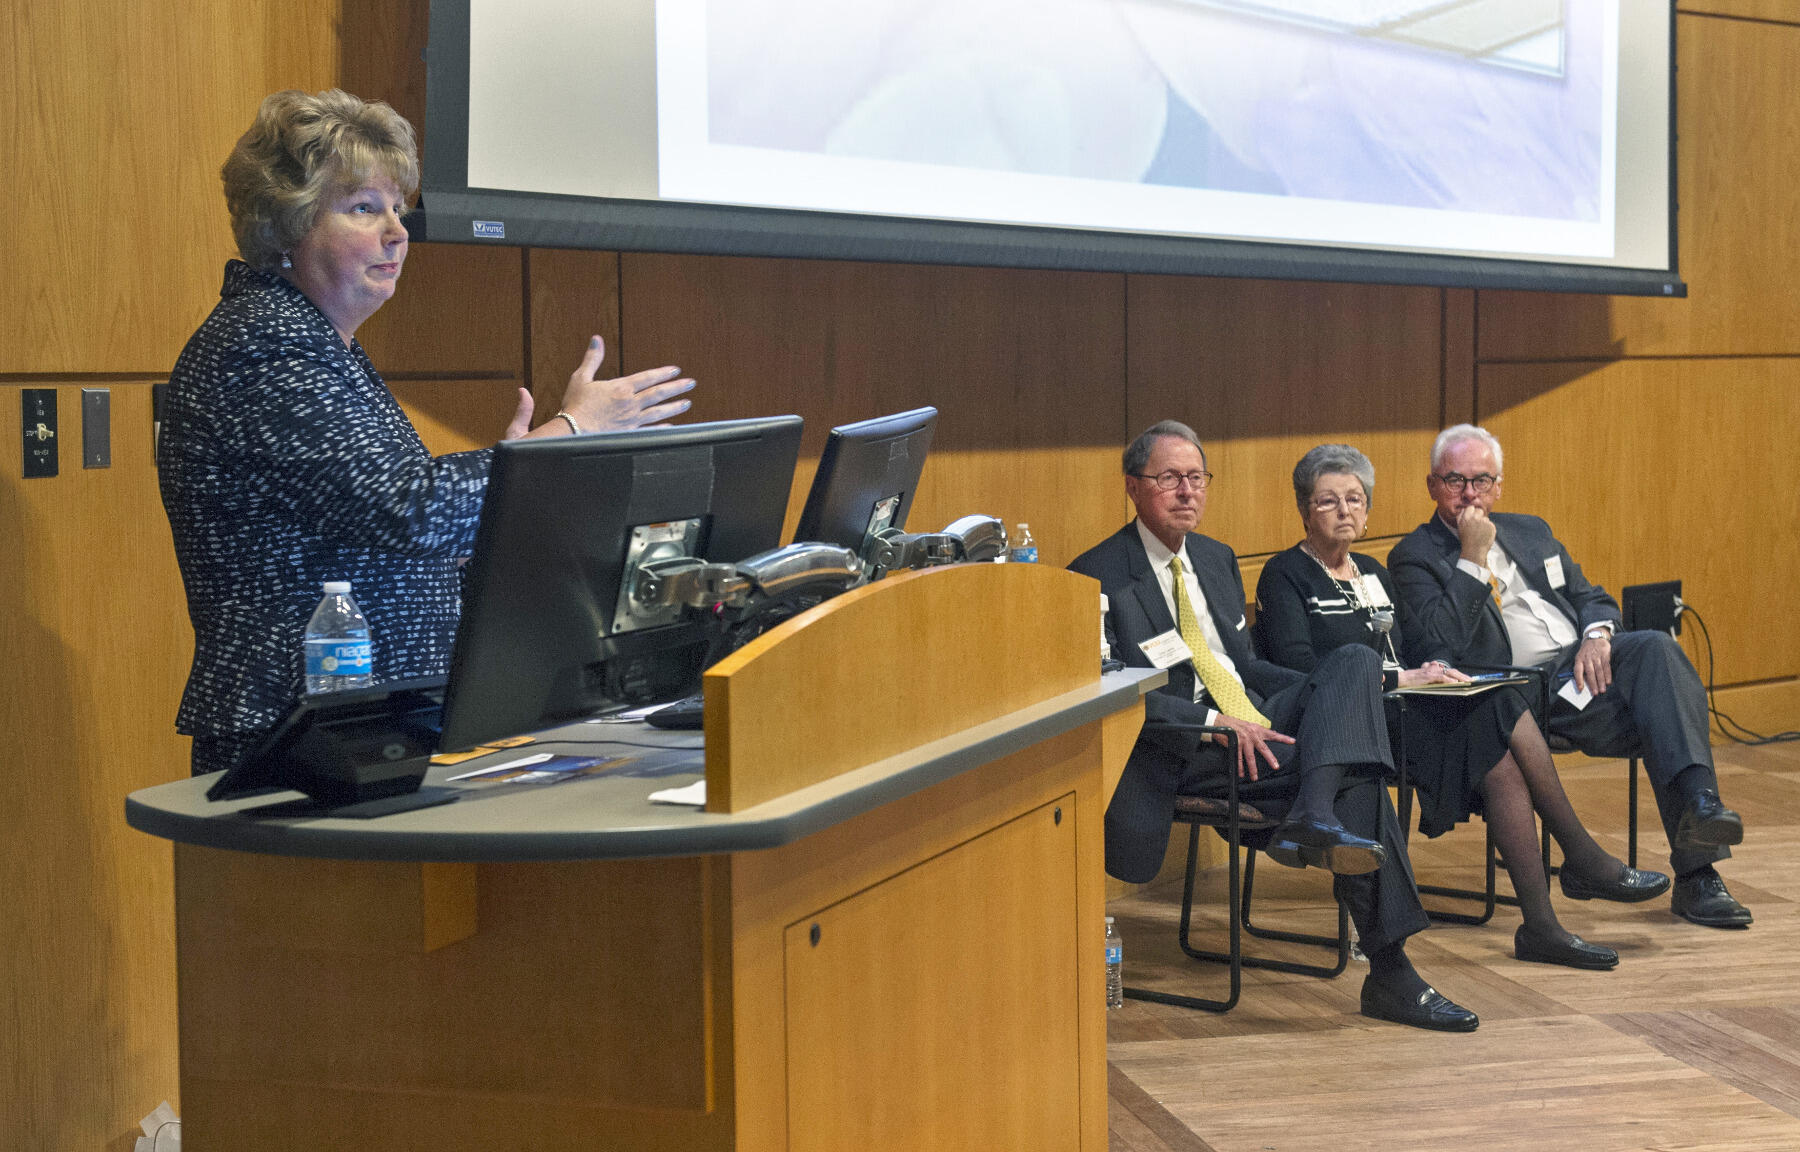 Beth Ann Swan, Ph.D., addresses the crowd during her keynote speech.
<br>Photo by Kevin Morley, University Marketing